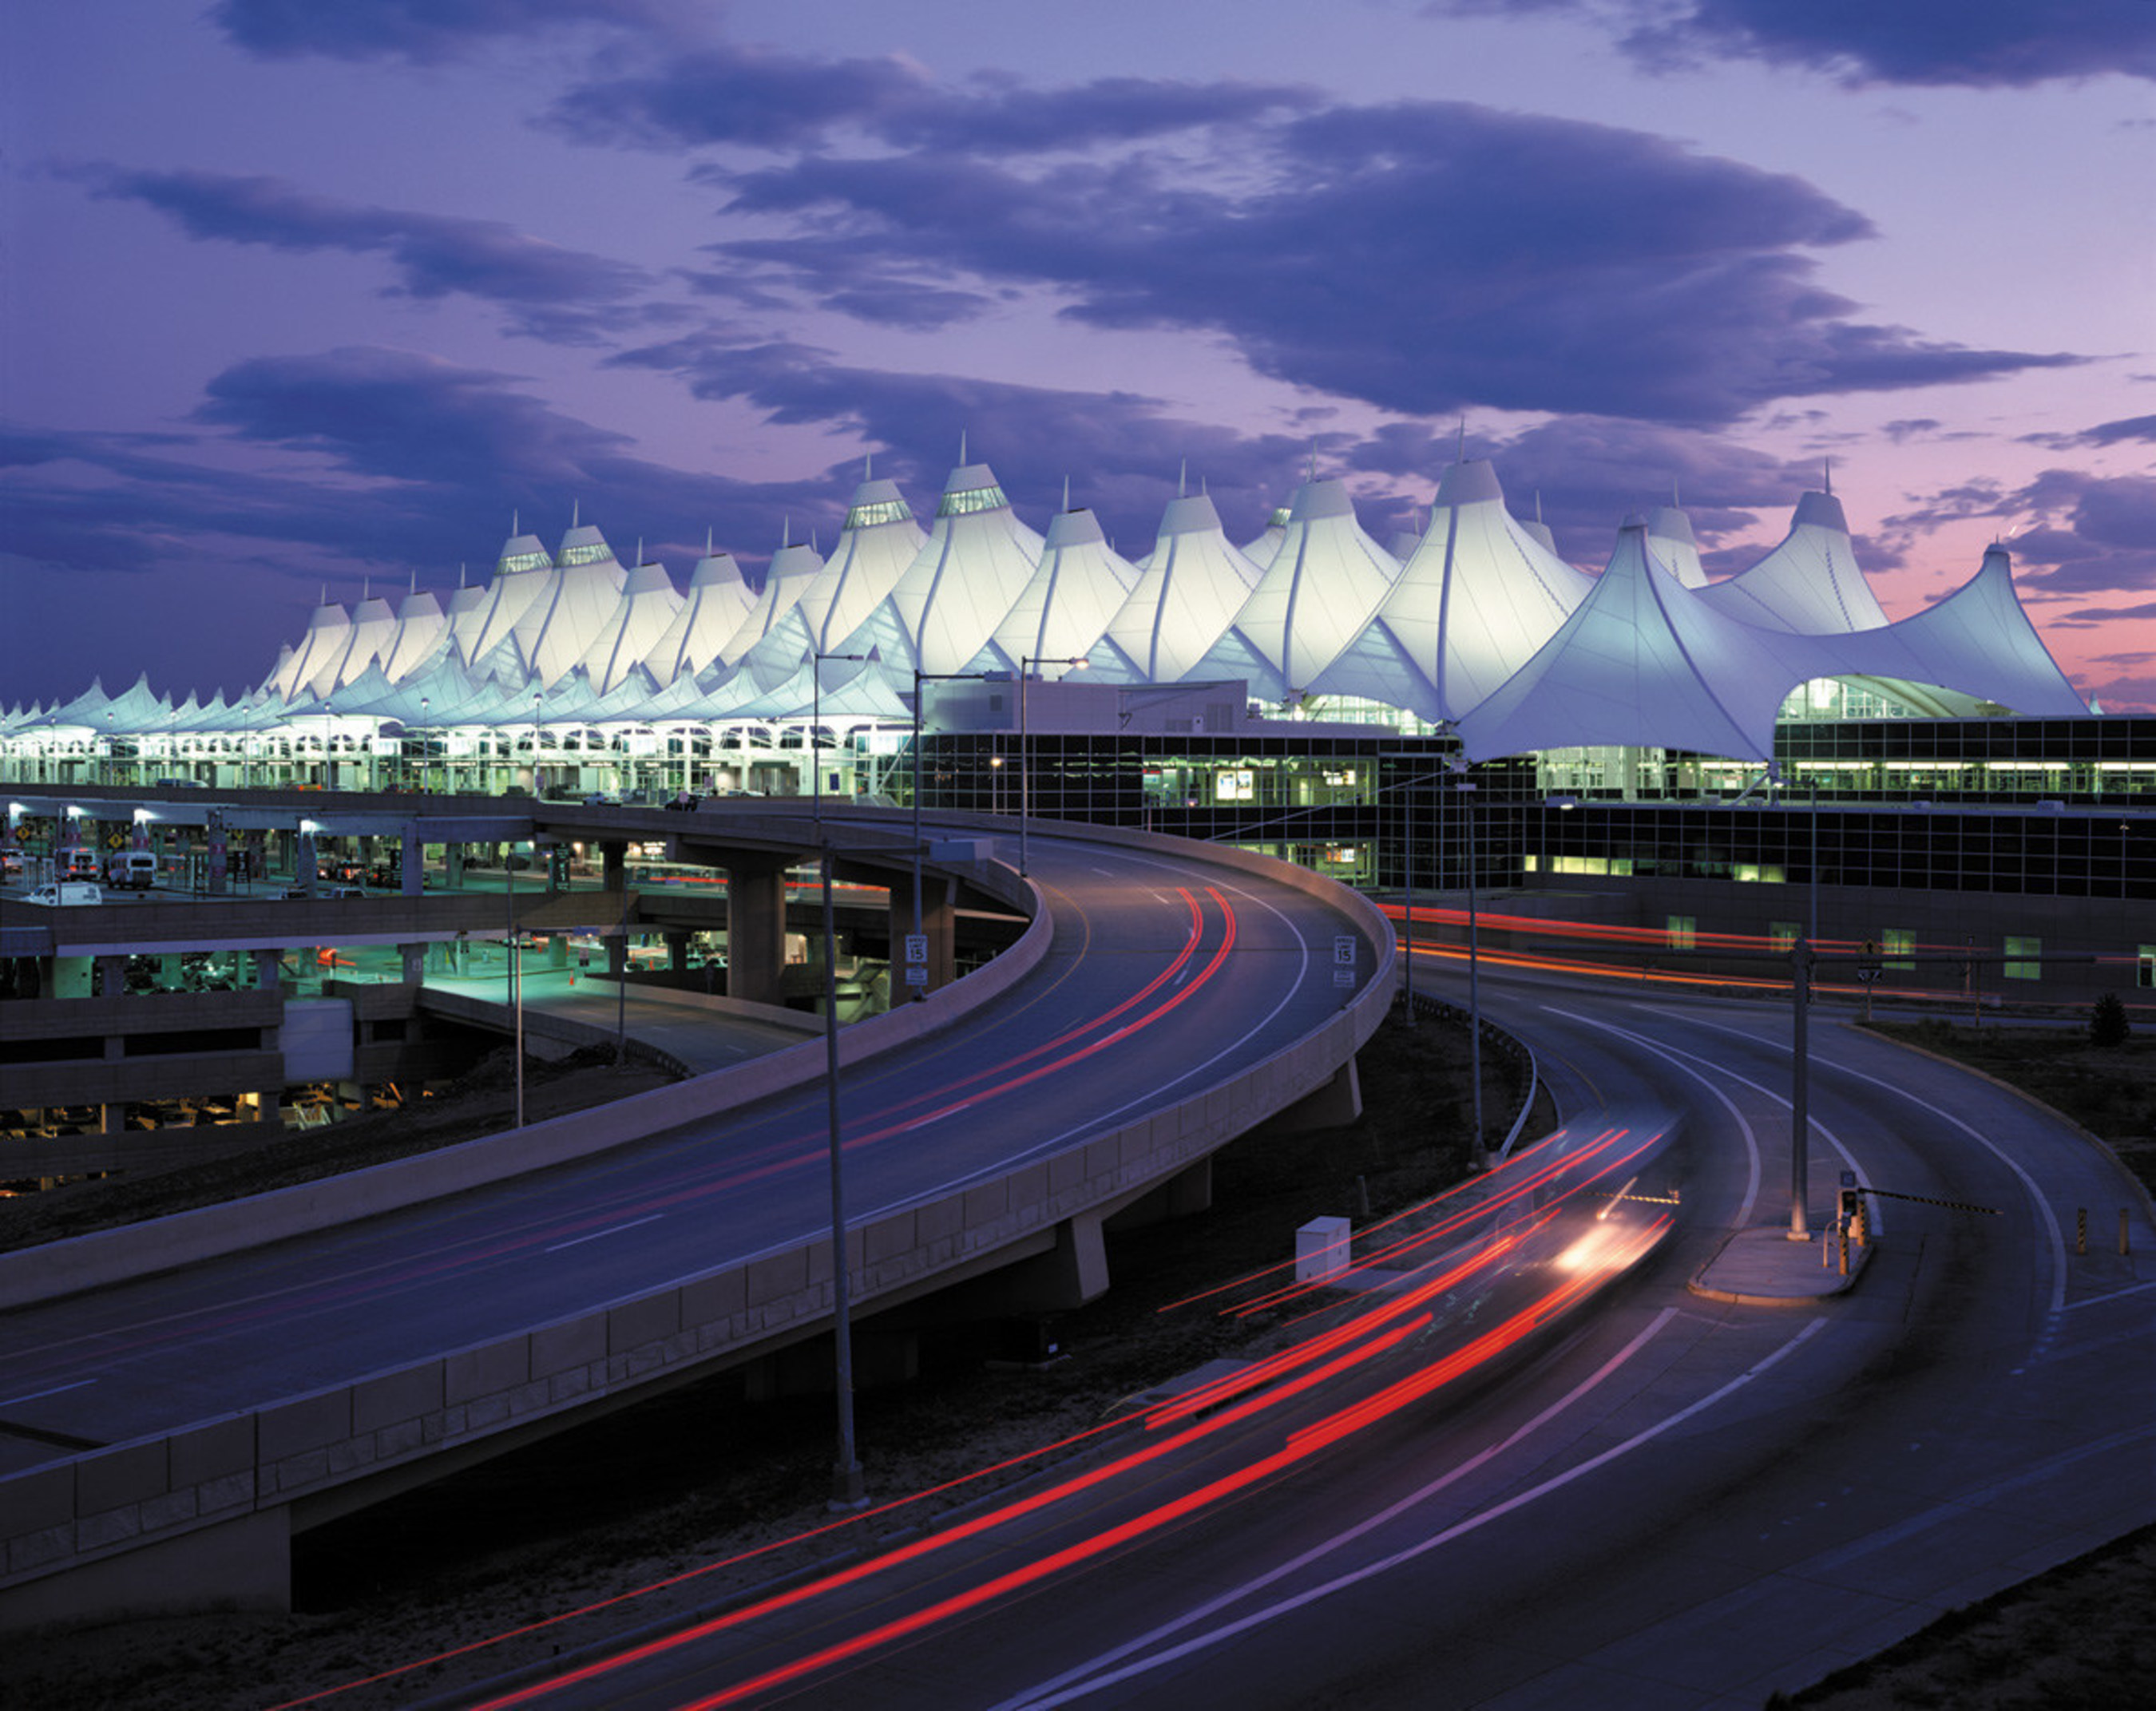 Denver International Airport Additions to Bring More Visitors/New